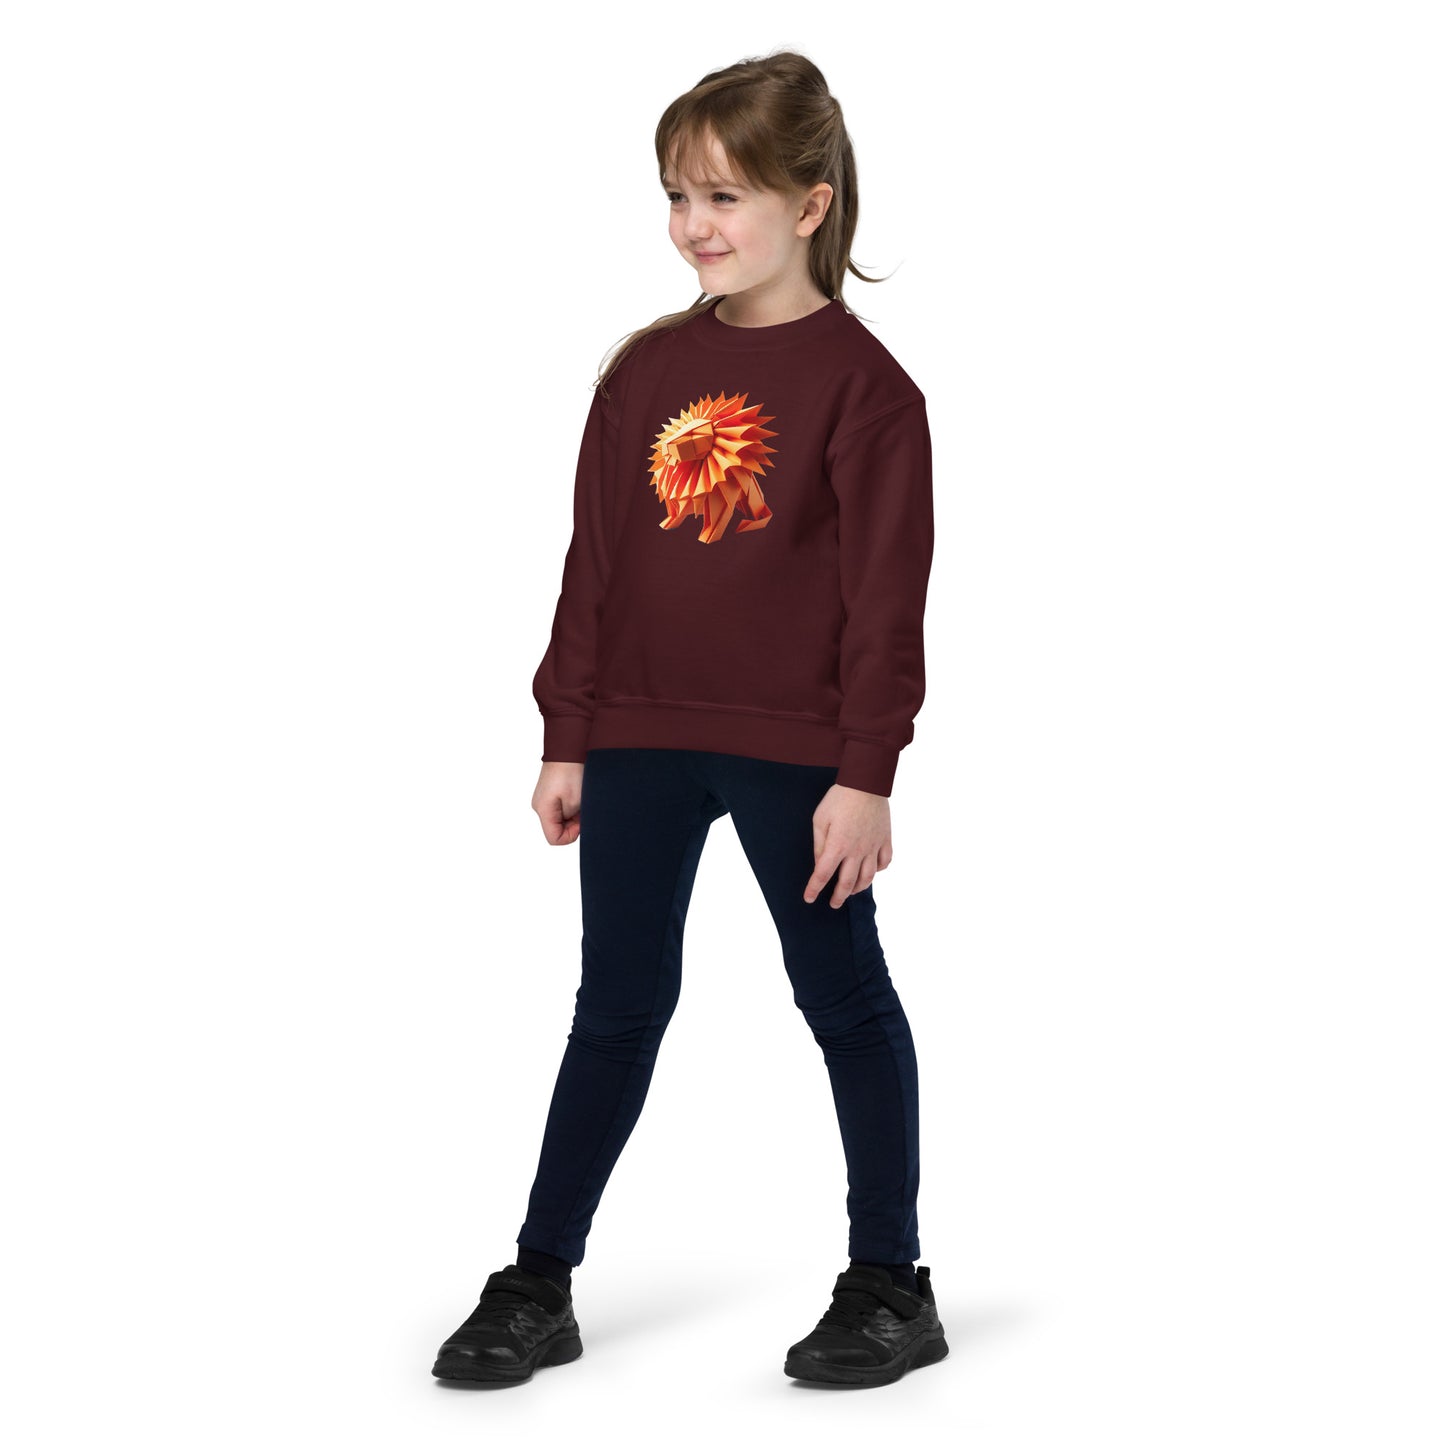 Youth with maroon sweater with print of a lion